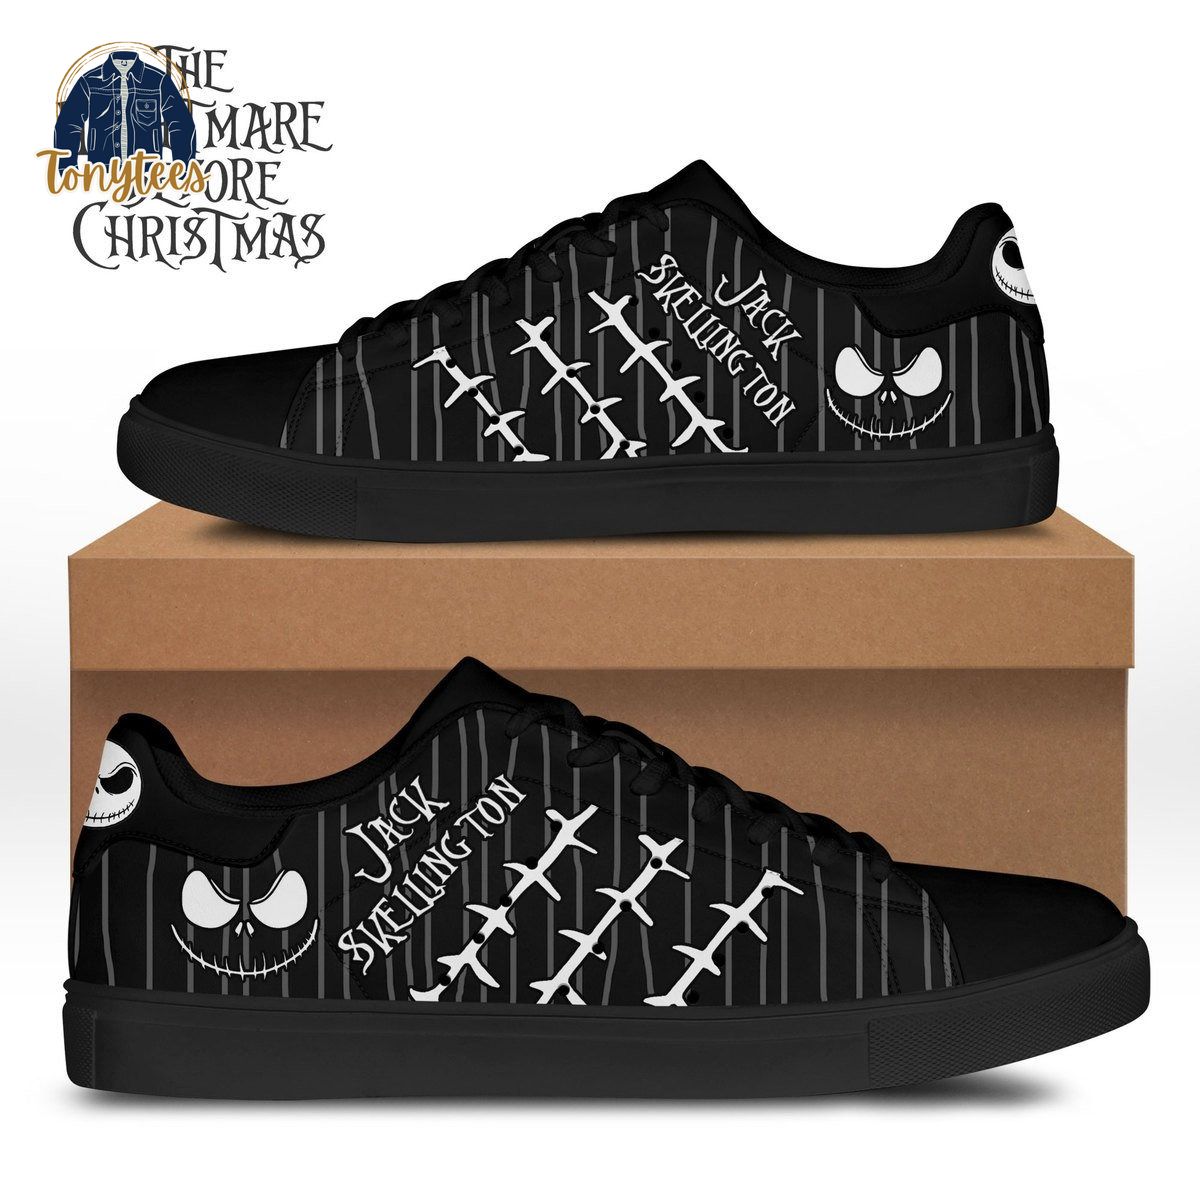 The night before christmas Jack Skellington adidas stan smith shoes